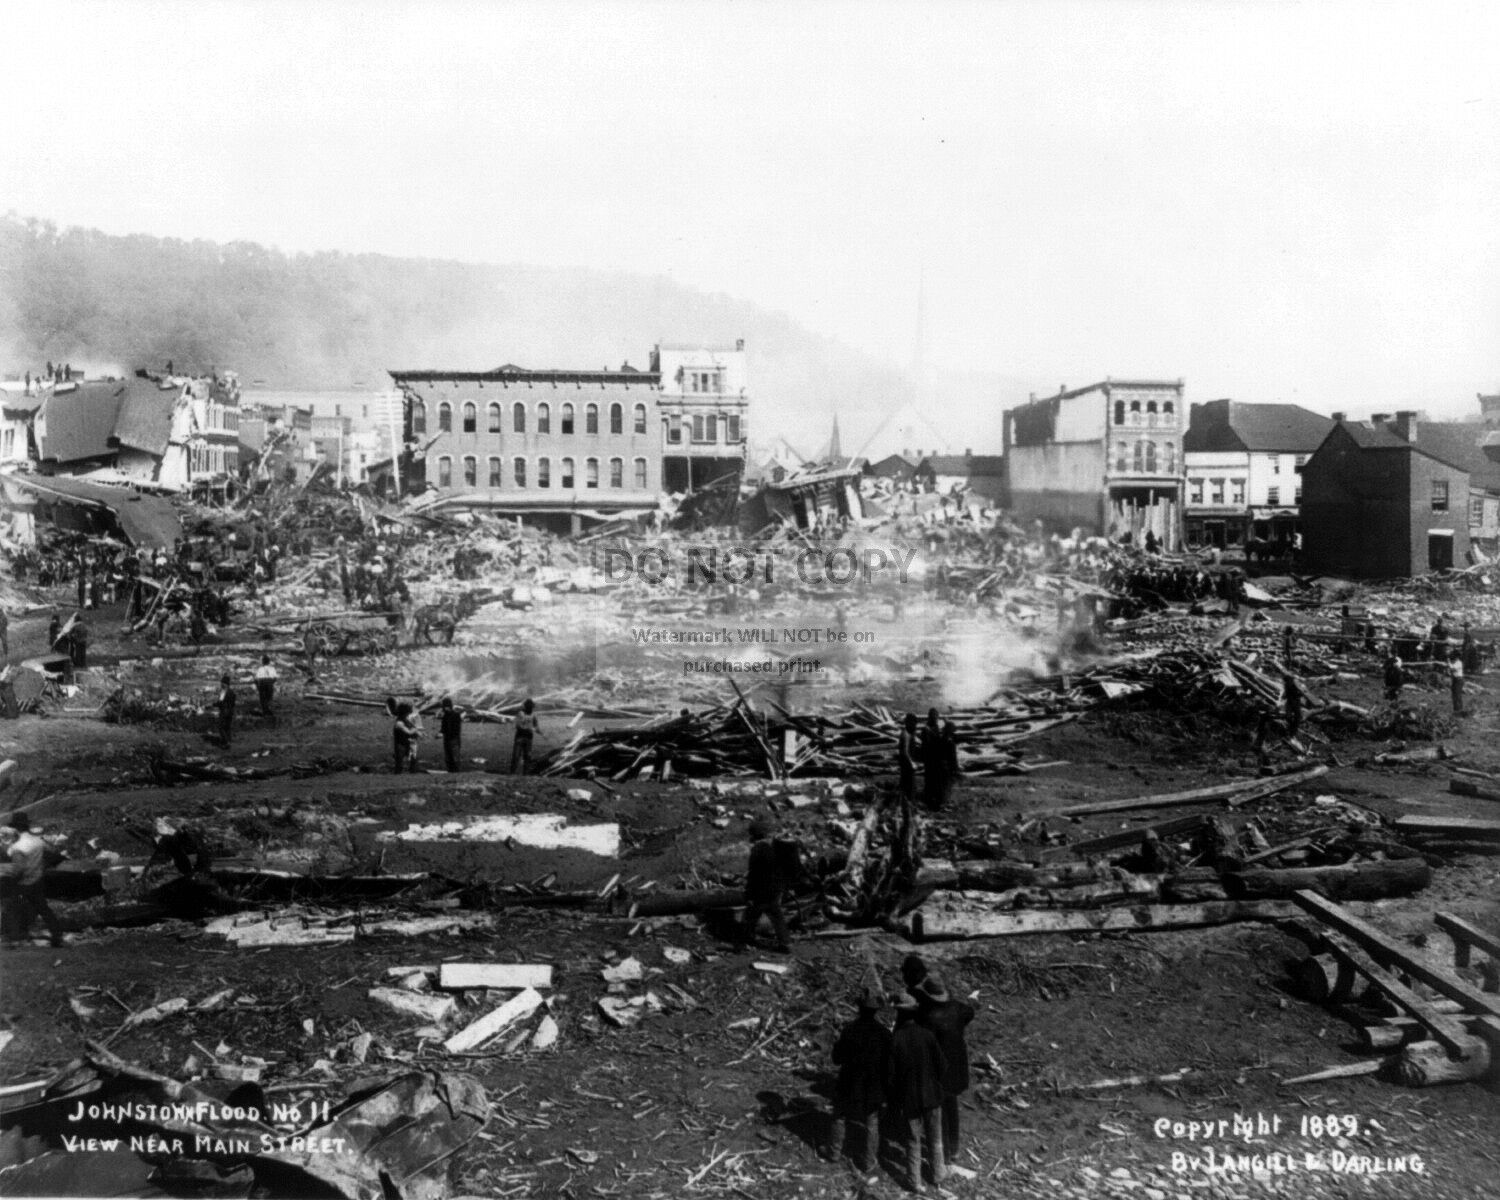 AFTERMATH OF THE 1889 JOHNSTOWN FLOOD IN VIEW NEAR MAIN ST - 8X10 PHOTO (DA-011)